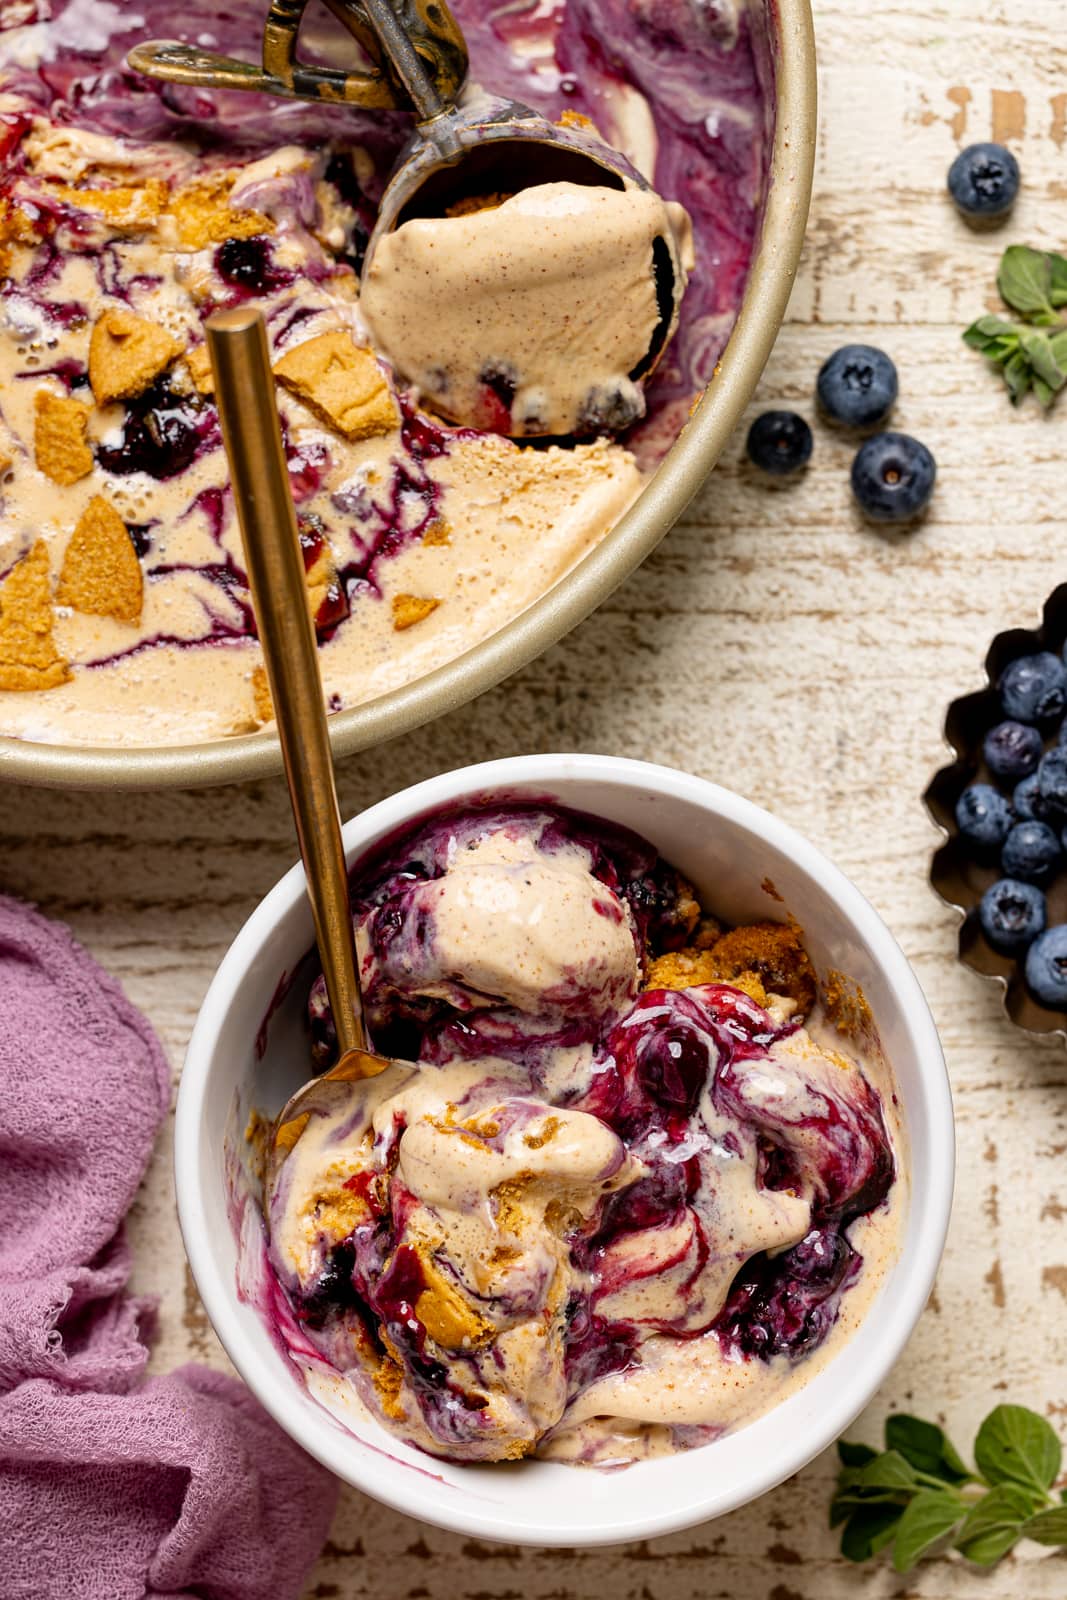 Ice cream in a bowl with spoon and blueberries.